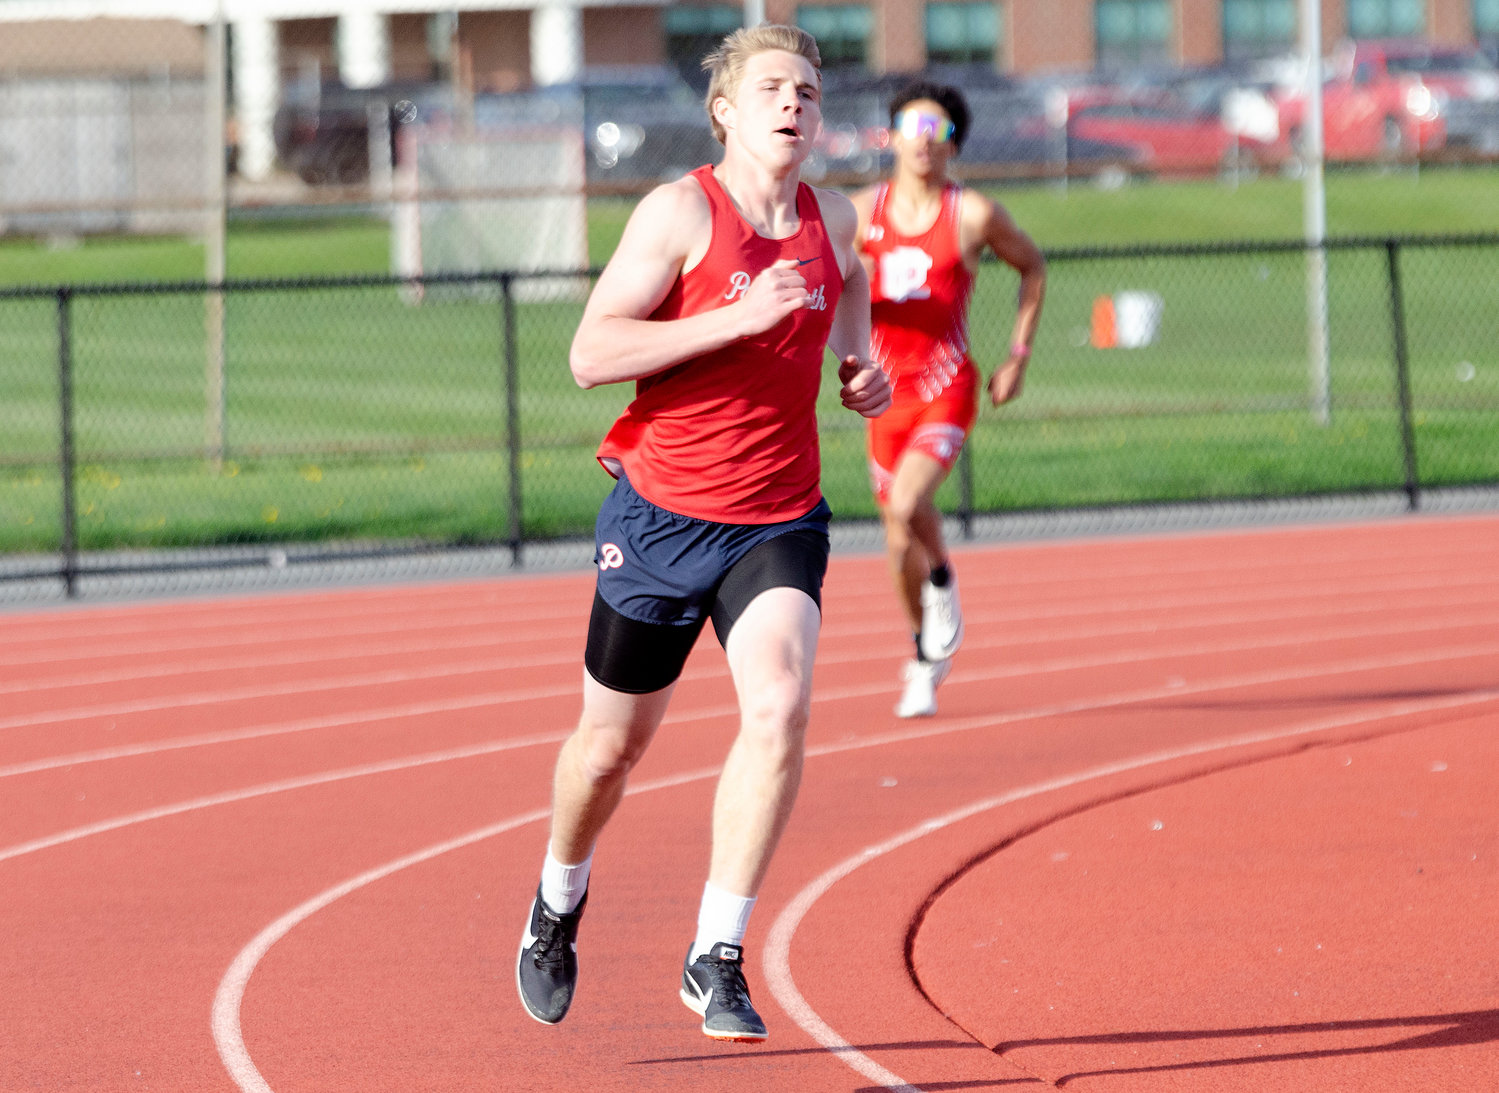 The Patriots’ Jeff Brady rounds the corner on his way to winning the 400-meter run in a time of 52.1 seconds.